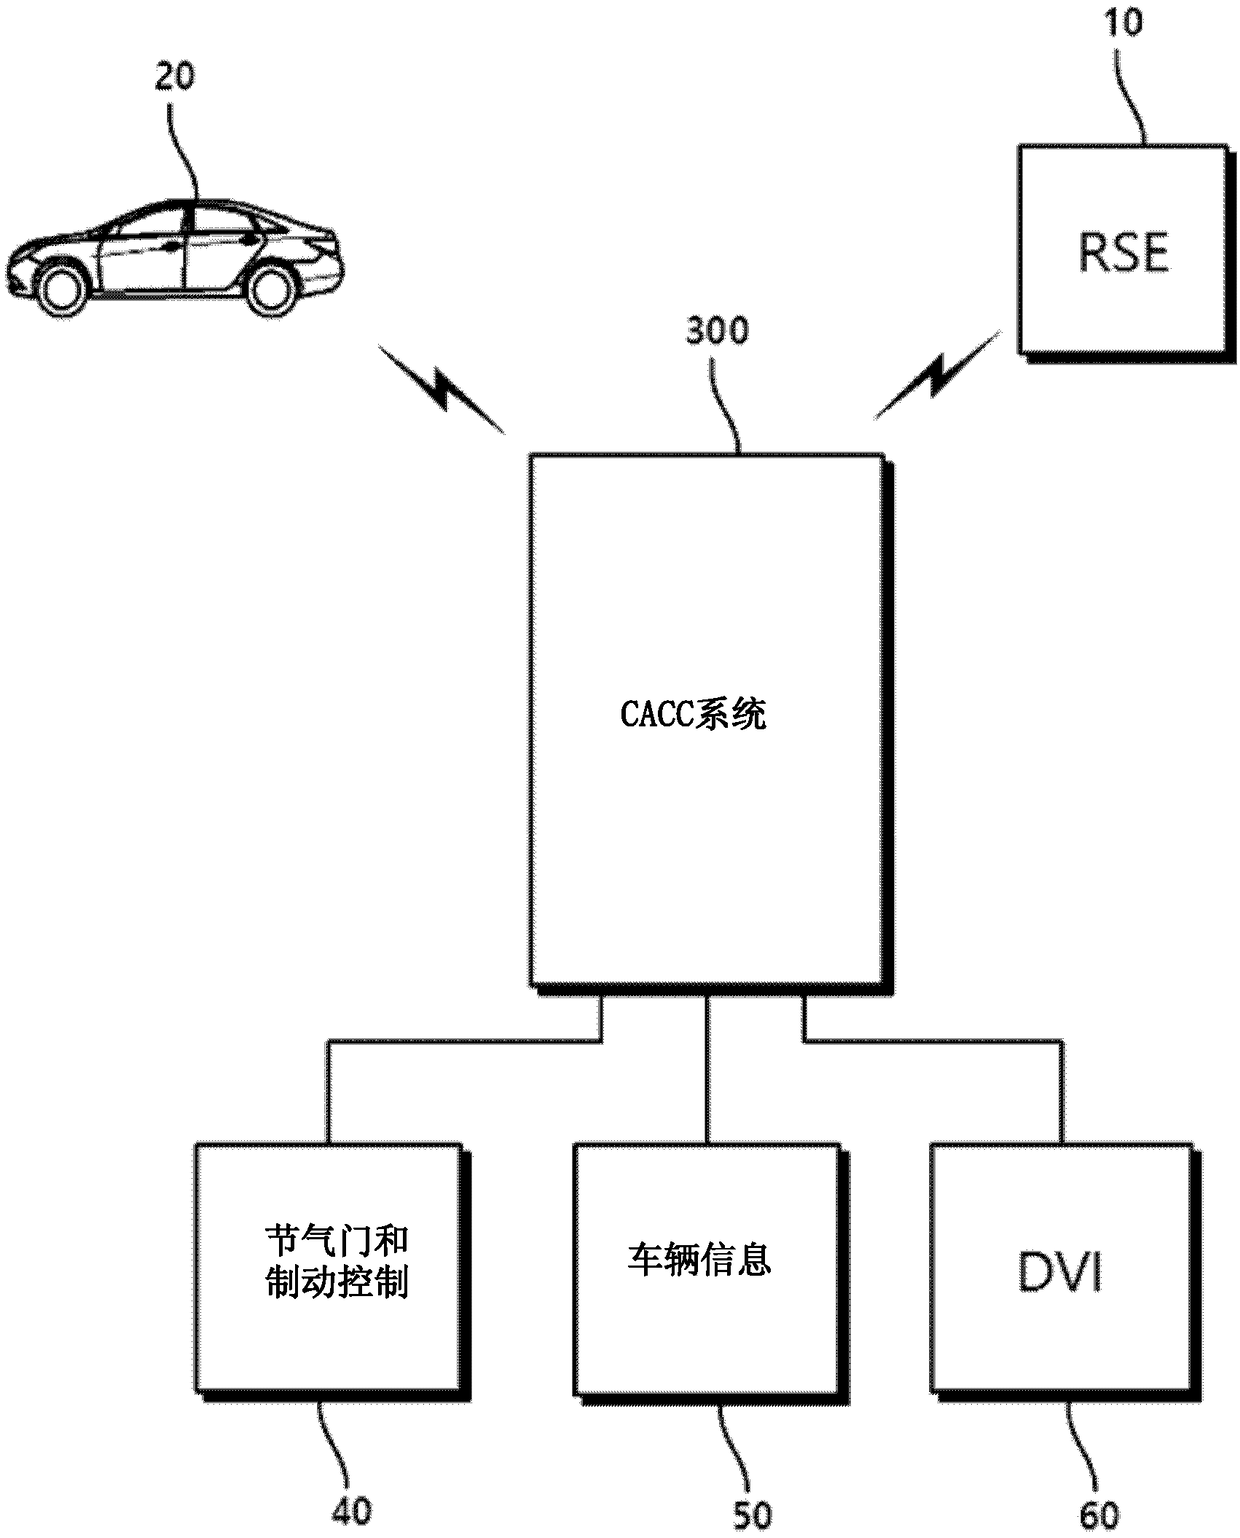 Cooperative Adaptive Cruise Control based on Driving Pattern of Target Vehicle